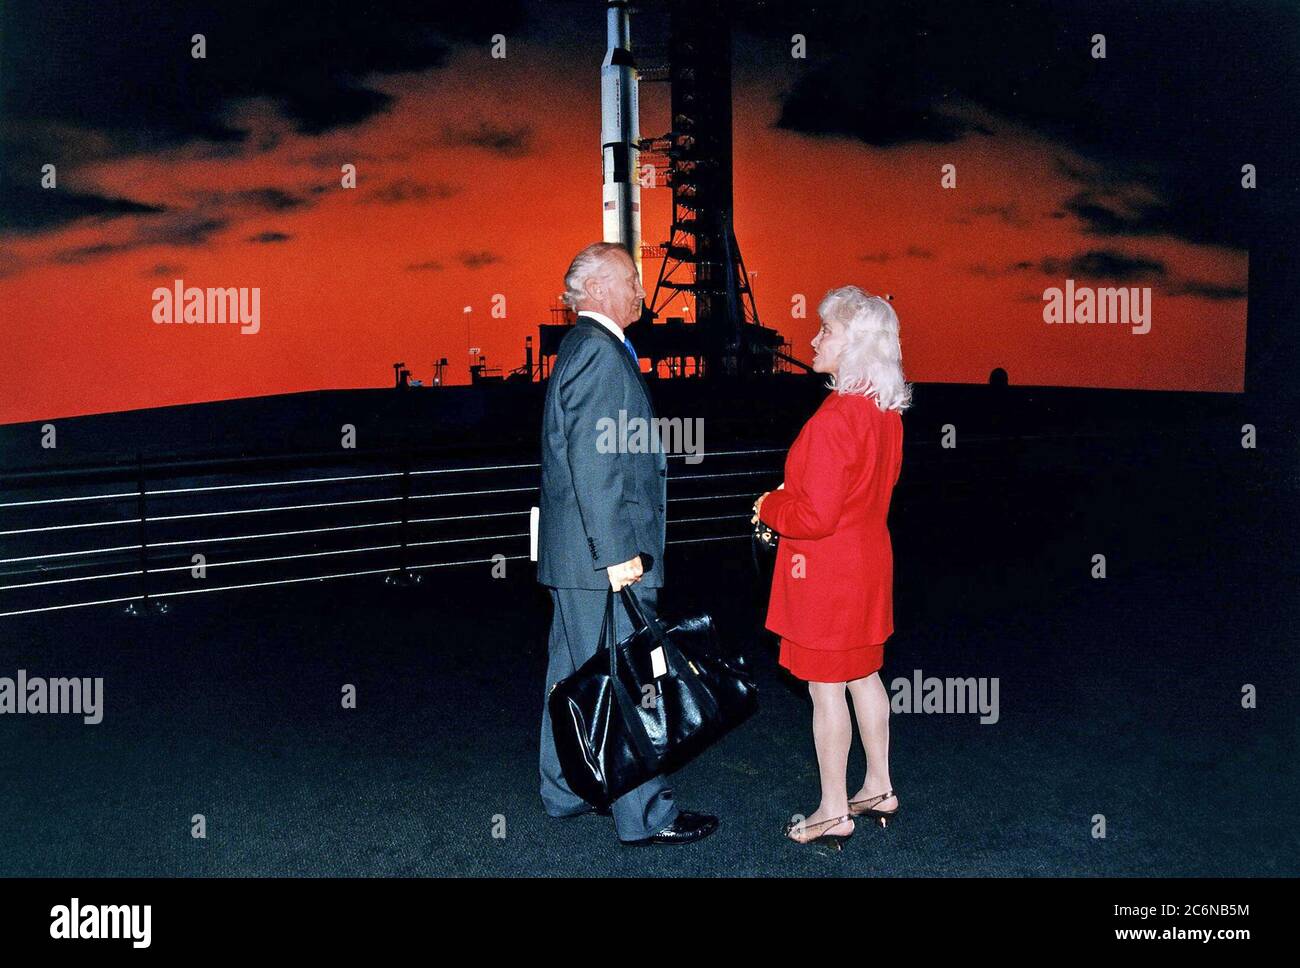 Apollo 11 Lunar Module Pilot Edwin E. 'Buzz' Aldrin, Jr. and his wife, Lois, stand before a painting of an Apollo/Saturn V launch vehicle at the pad in the new Apollo/Saturn V Center (ASVC) at KSC prior to the gala grand opening ceremony for the facility that was held Jan. 8, 1997. The astronauts were invited to participate in the event, which also featured NASA Administrator Dan Goldin and KSC Director Jay Honeycutt. The ASVC also features several other Apollo program spacecraft component displays and multimedia presentations. Stock Photo